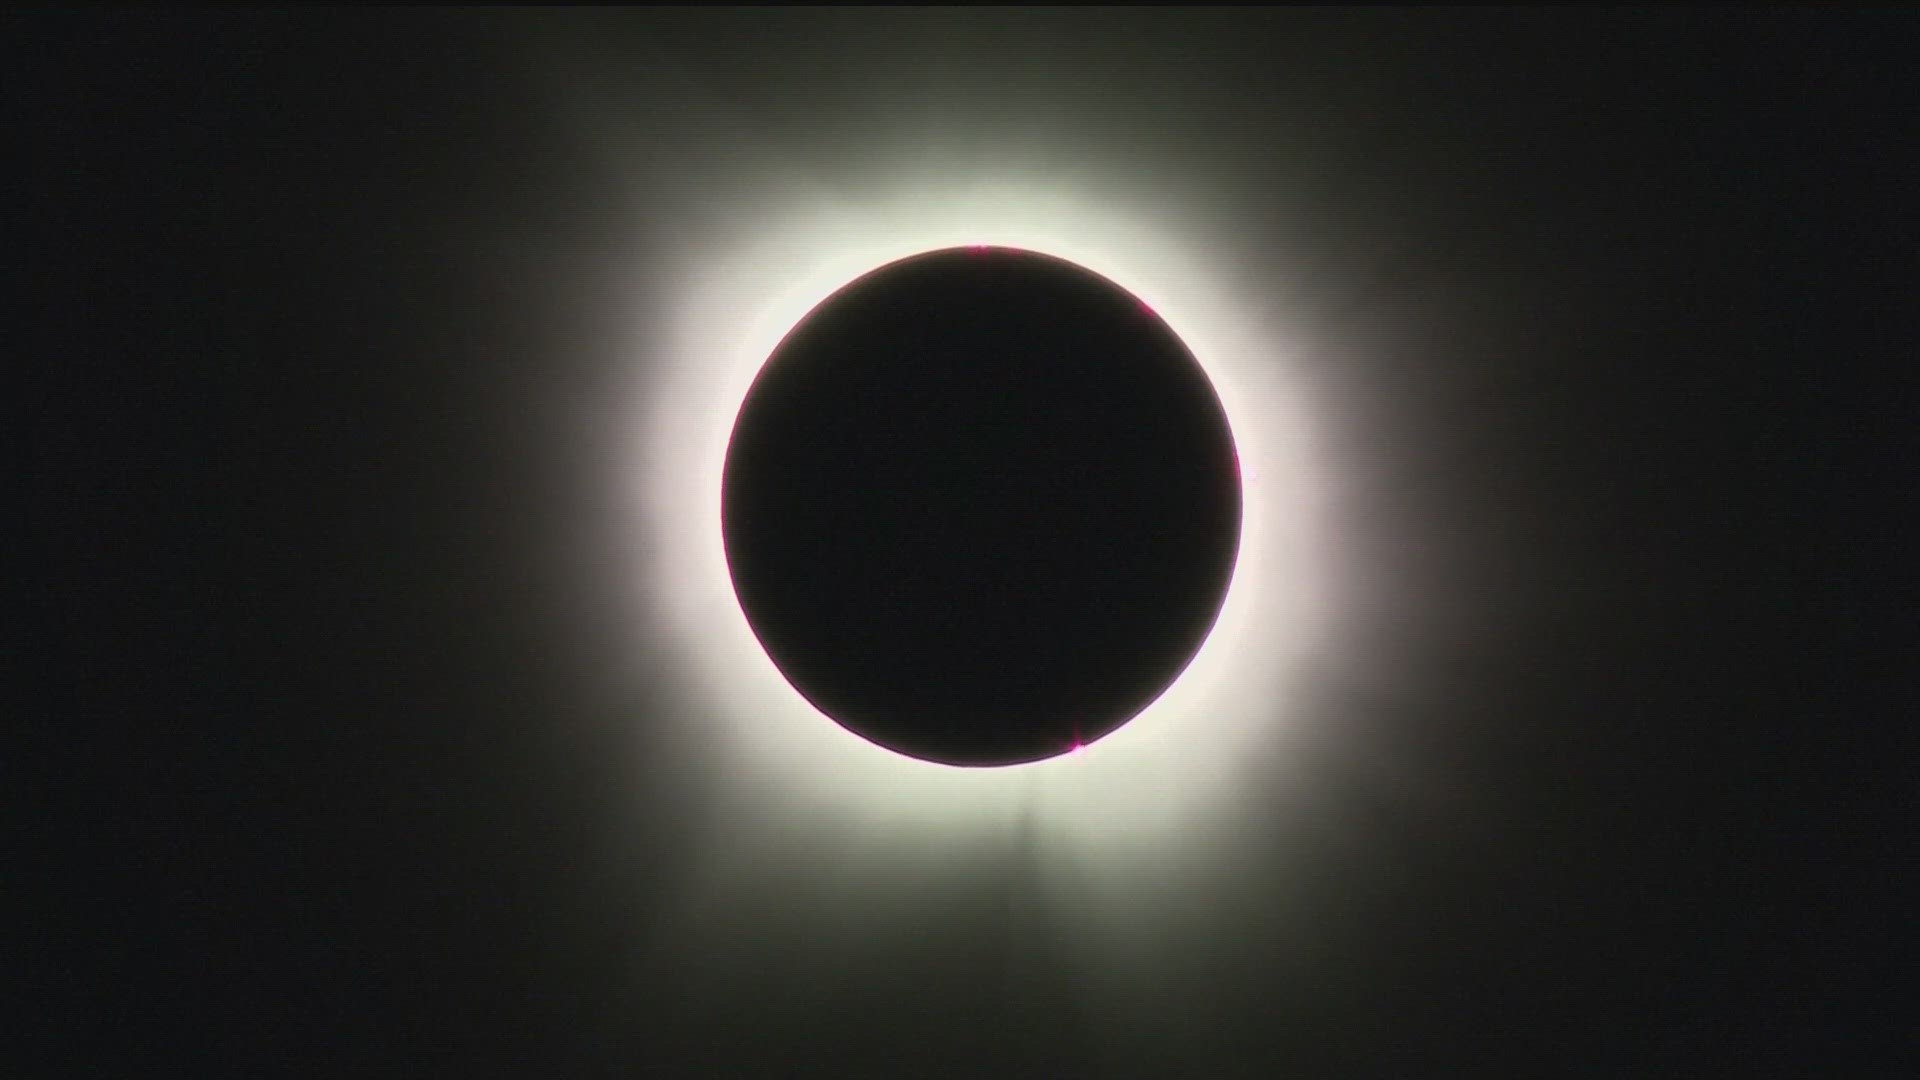 An estimated 44 million people live within the path of the eclipse